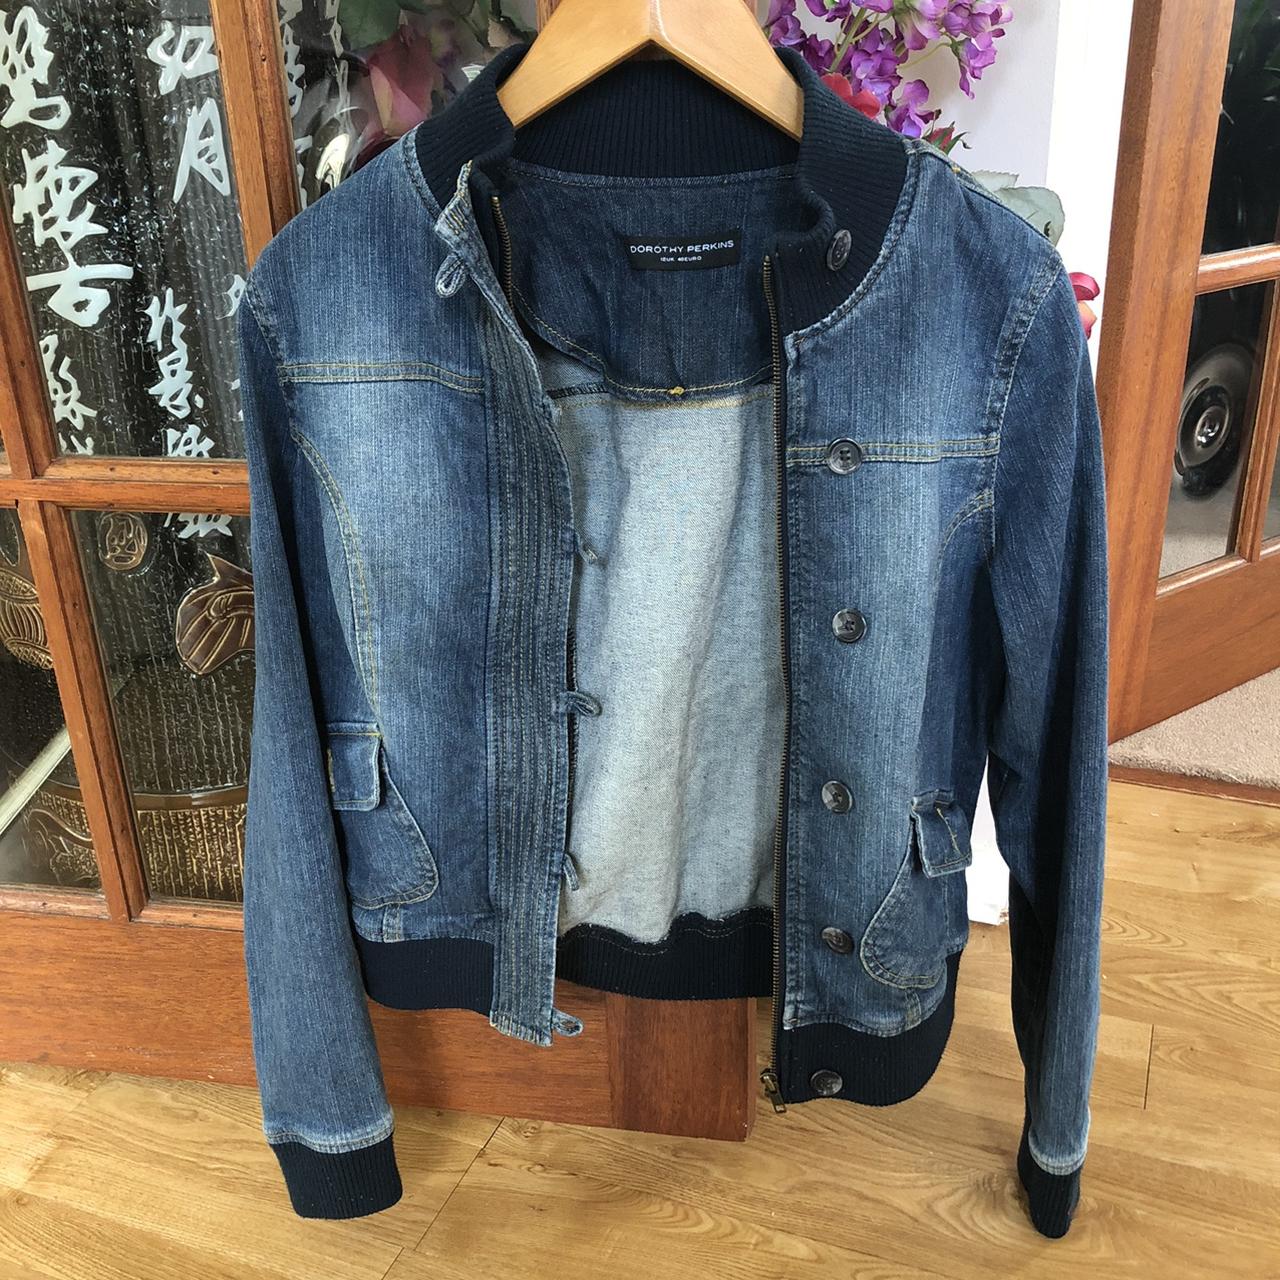 Men's Casual Denim Jacket New Spring/ Fall Retro Stand-Up Collar Jeans Coat  | eBay